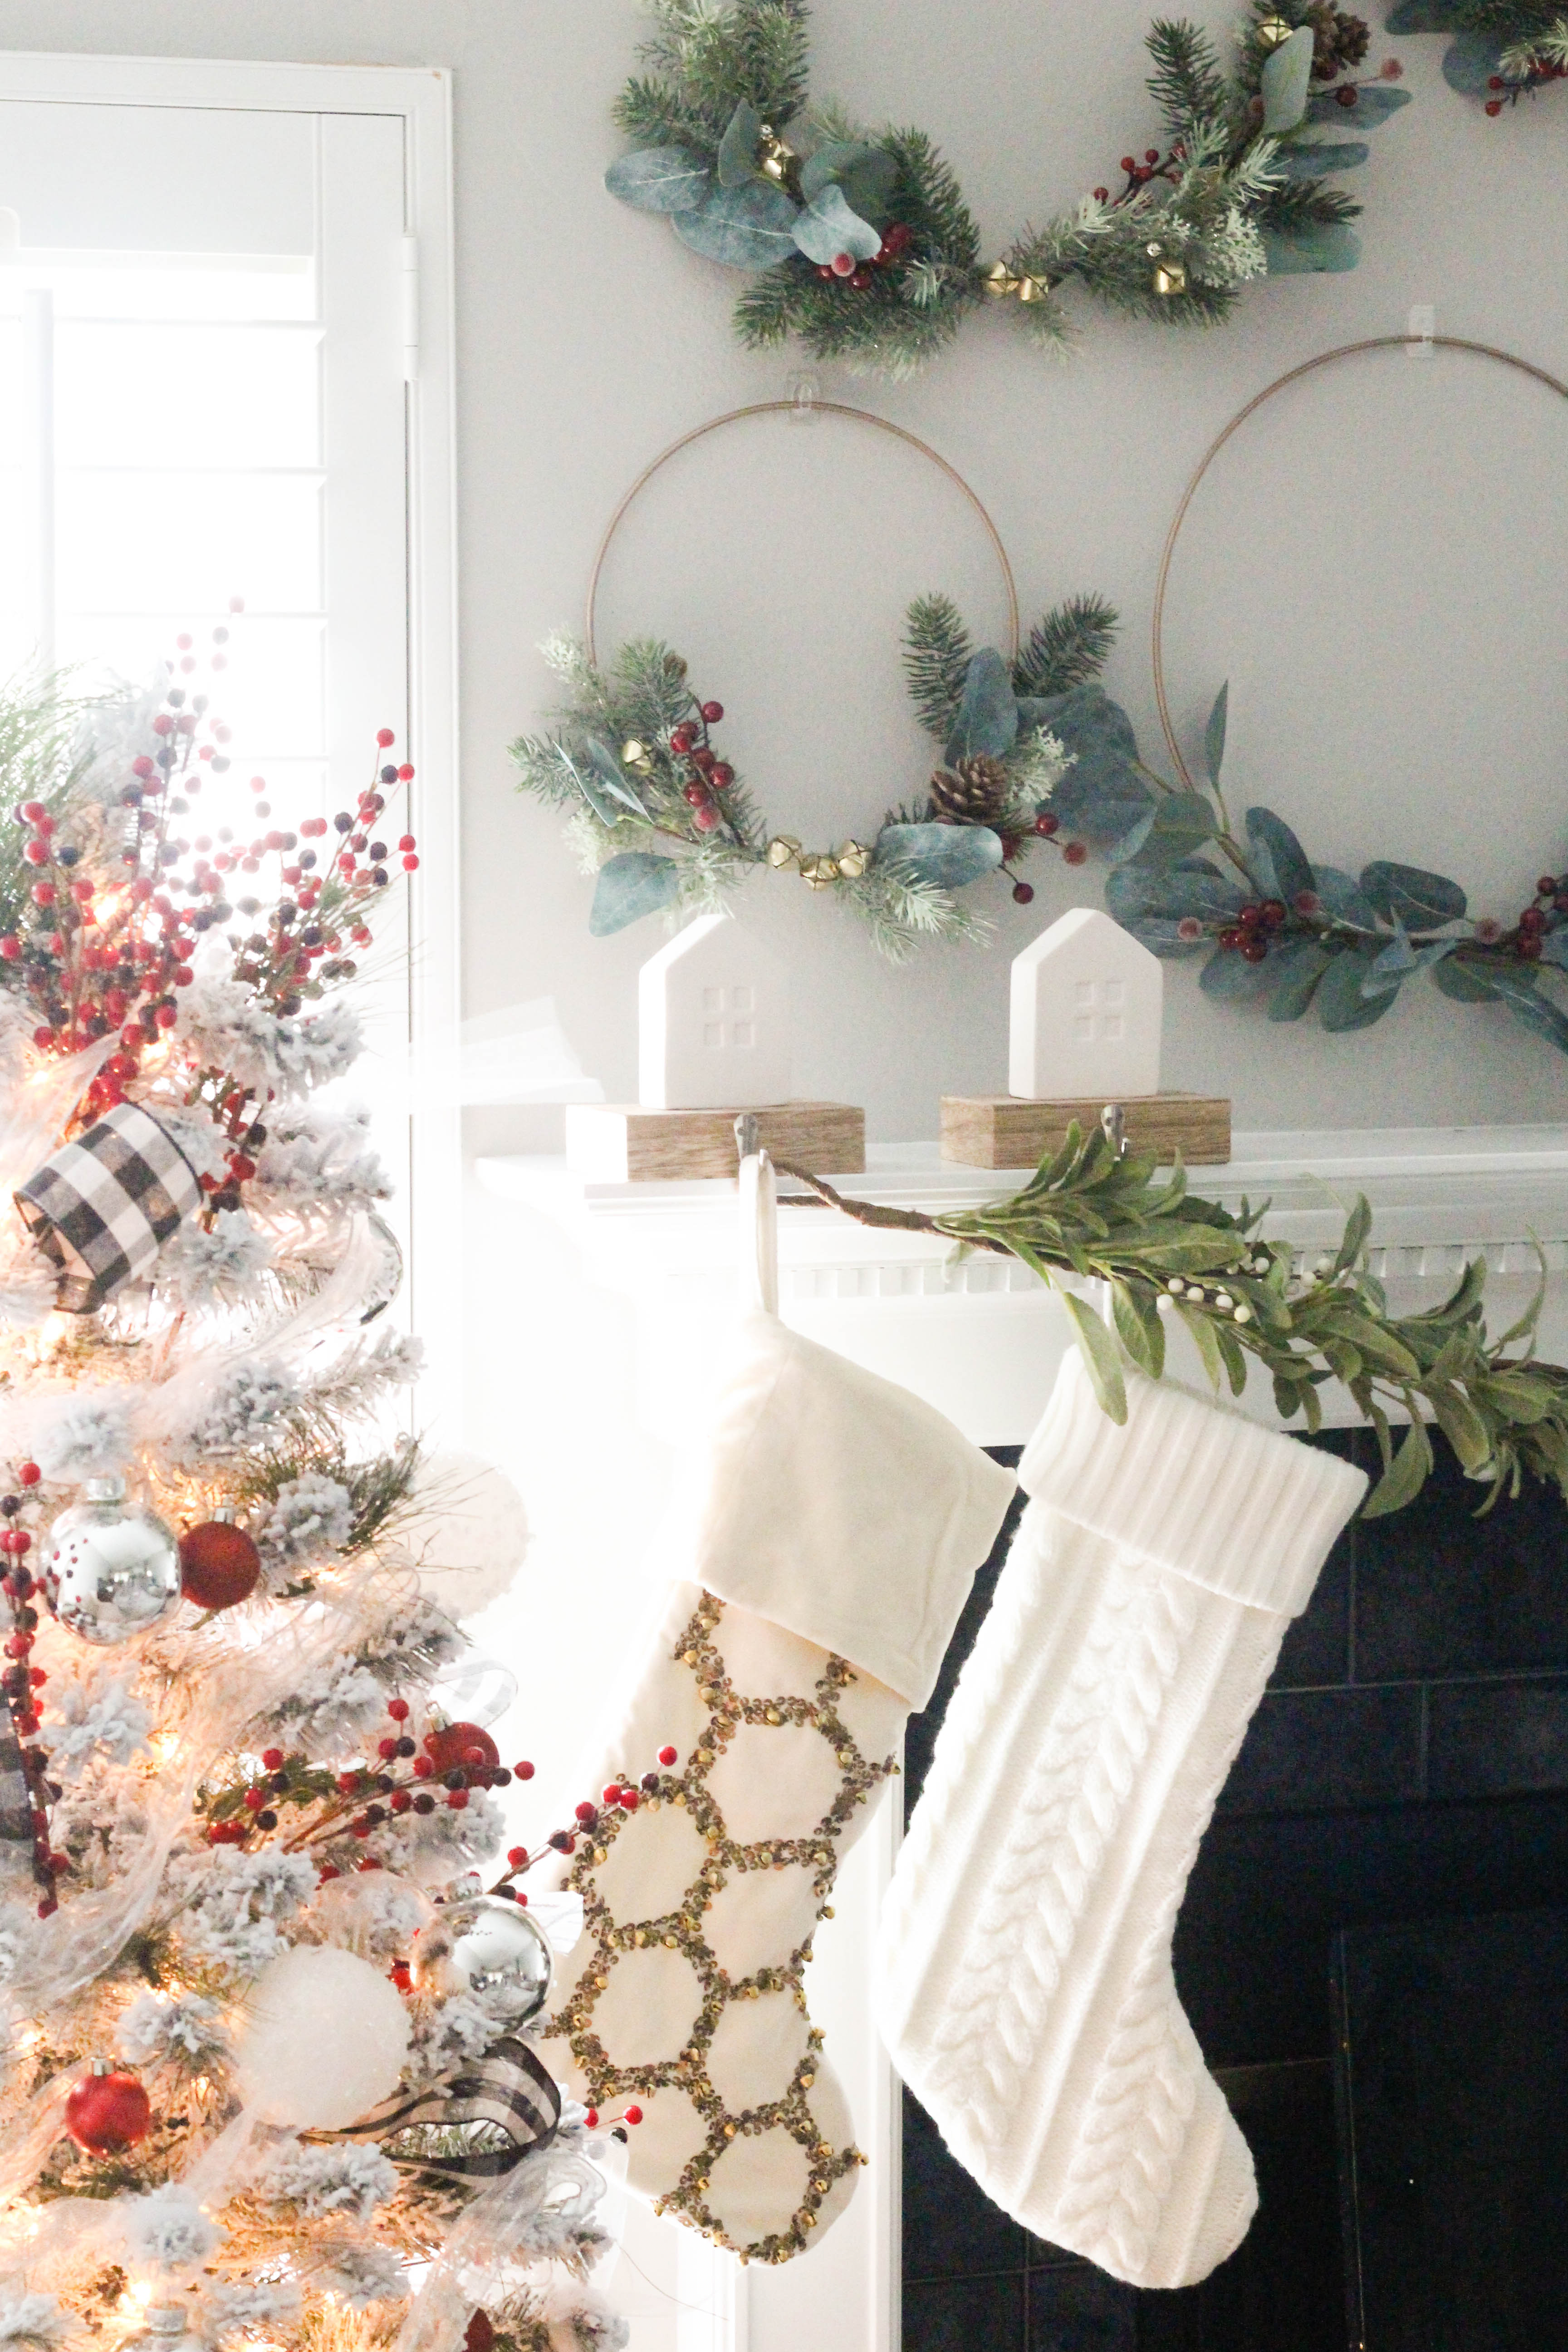 Our Christmas Home Decor 2017 - Within the Grove